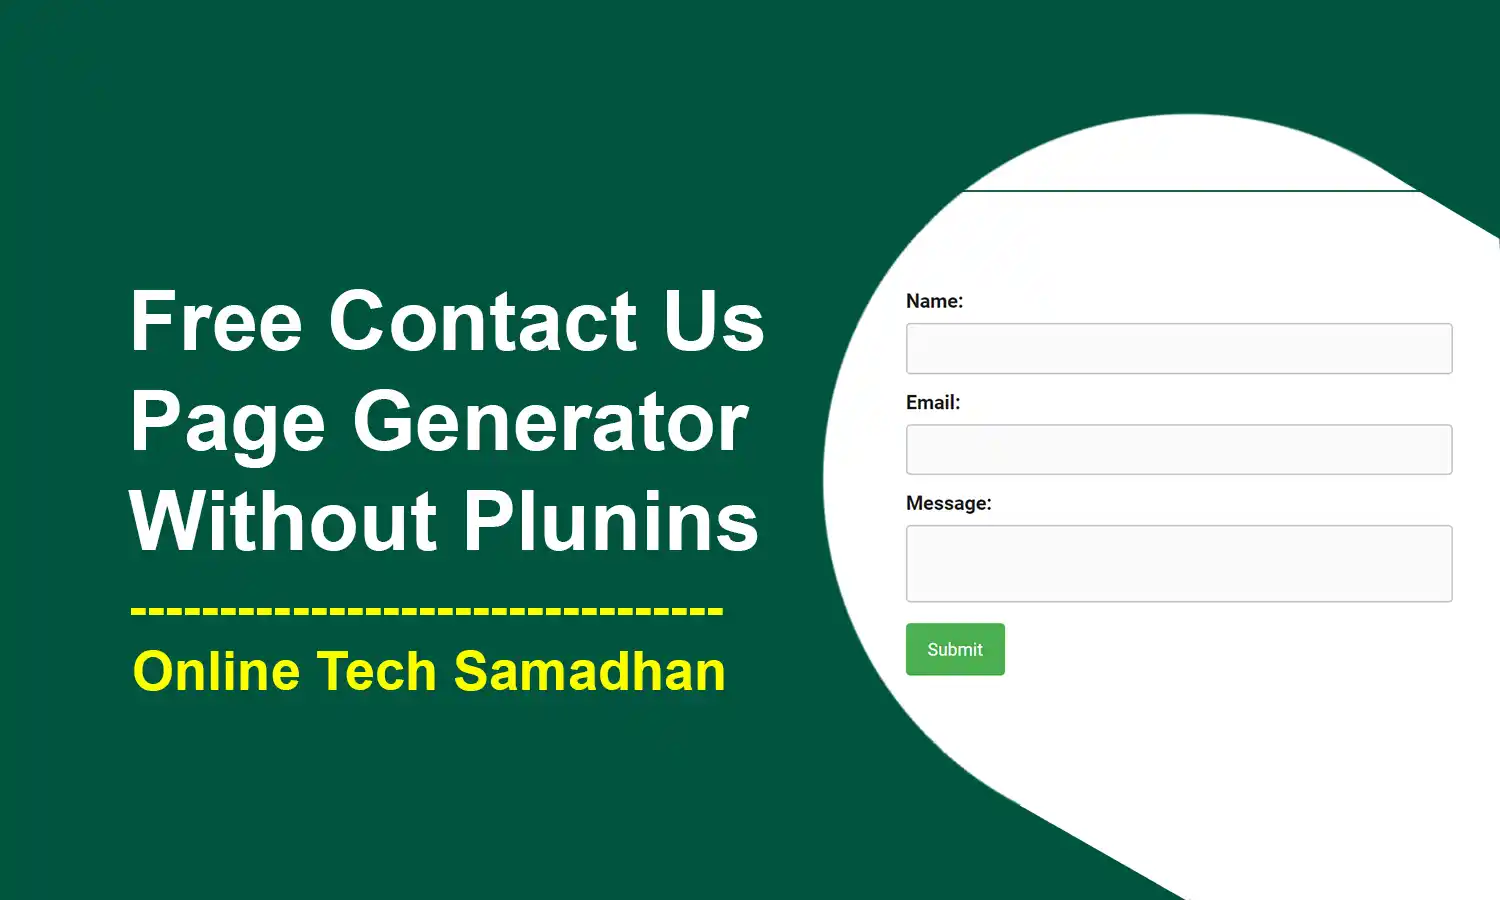 Free Contact Us Page Generator